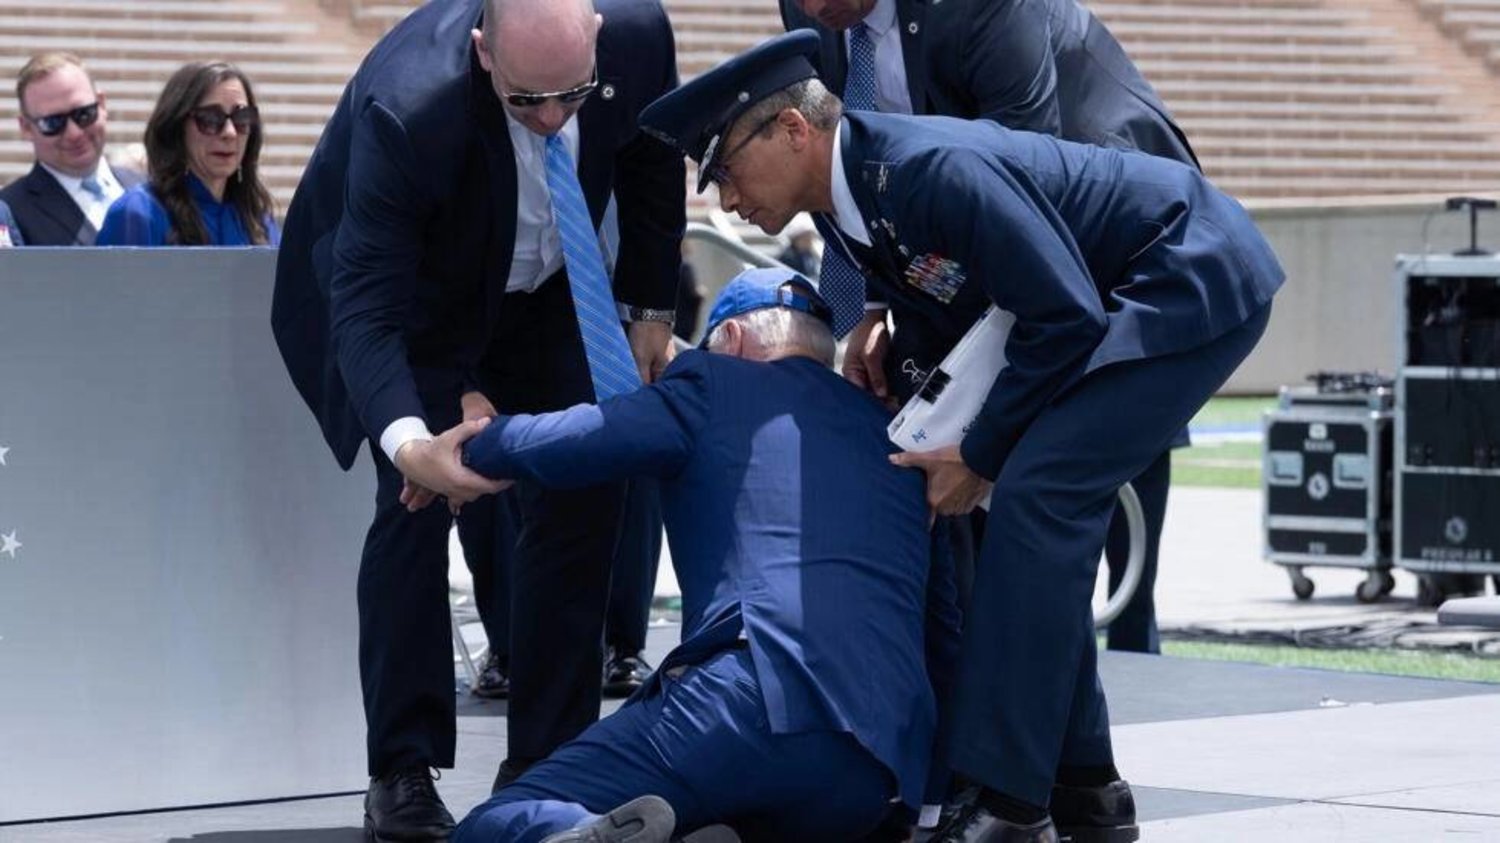 US President Joe Biden is helped up after falling during the graduation ceremony at the United States Air Force Academy. Brendan Smialowski / AFP